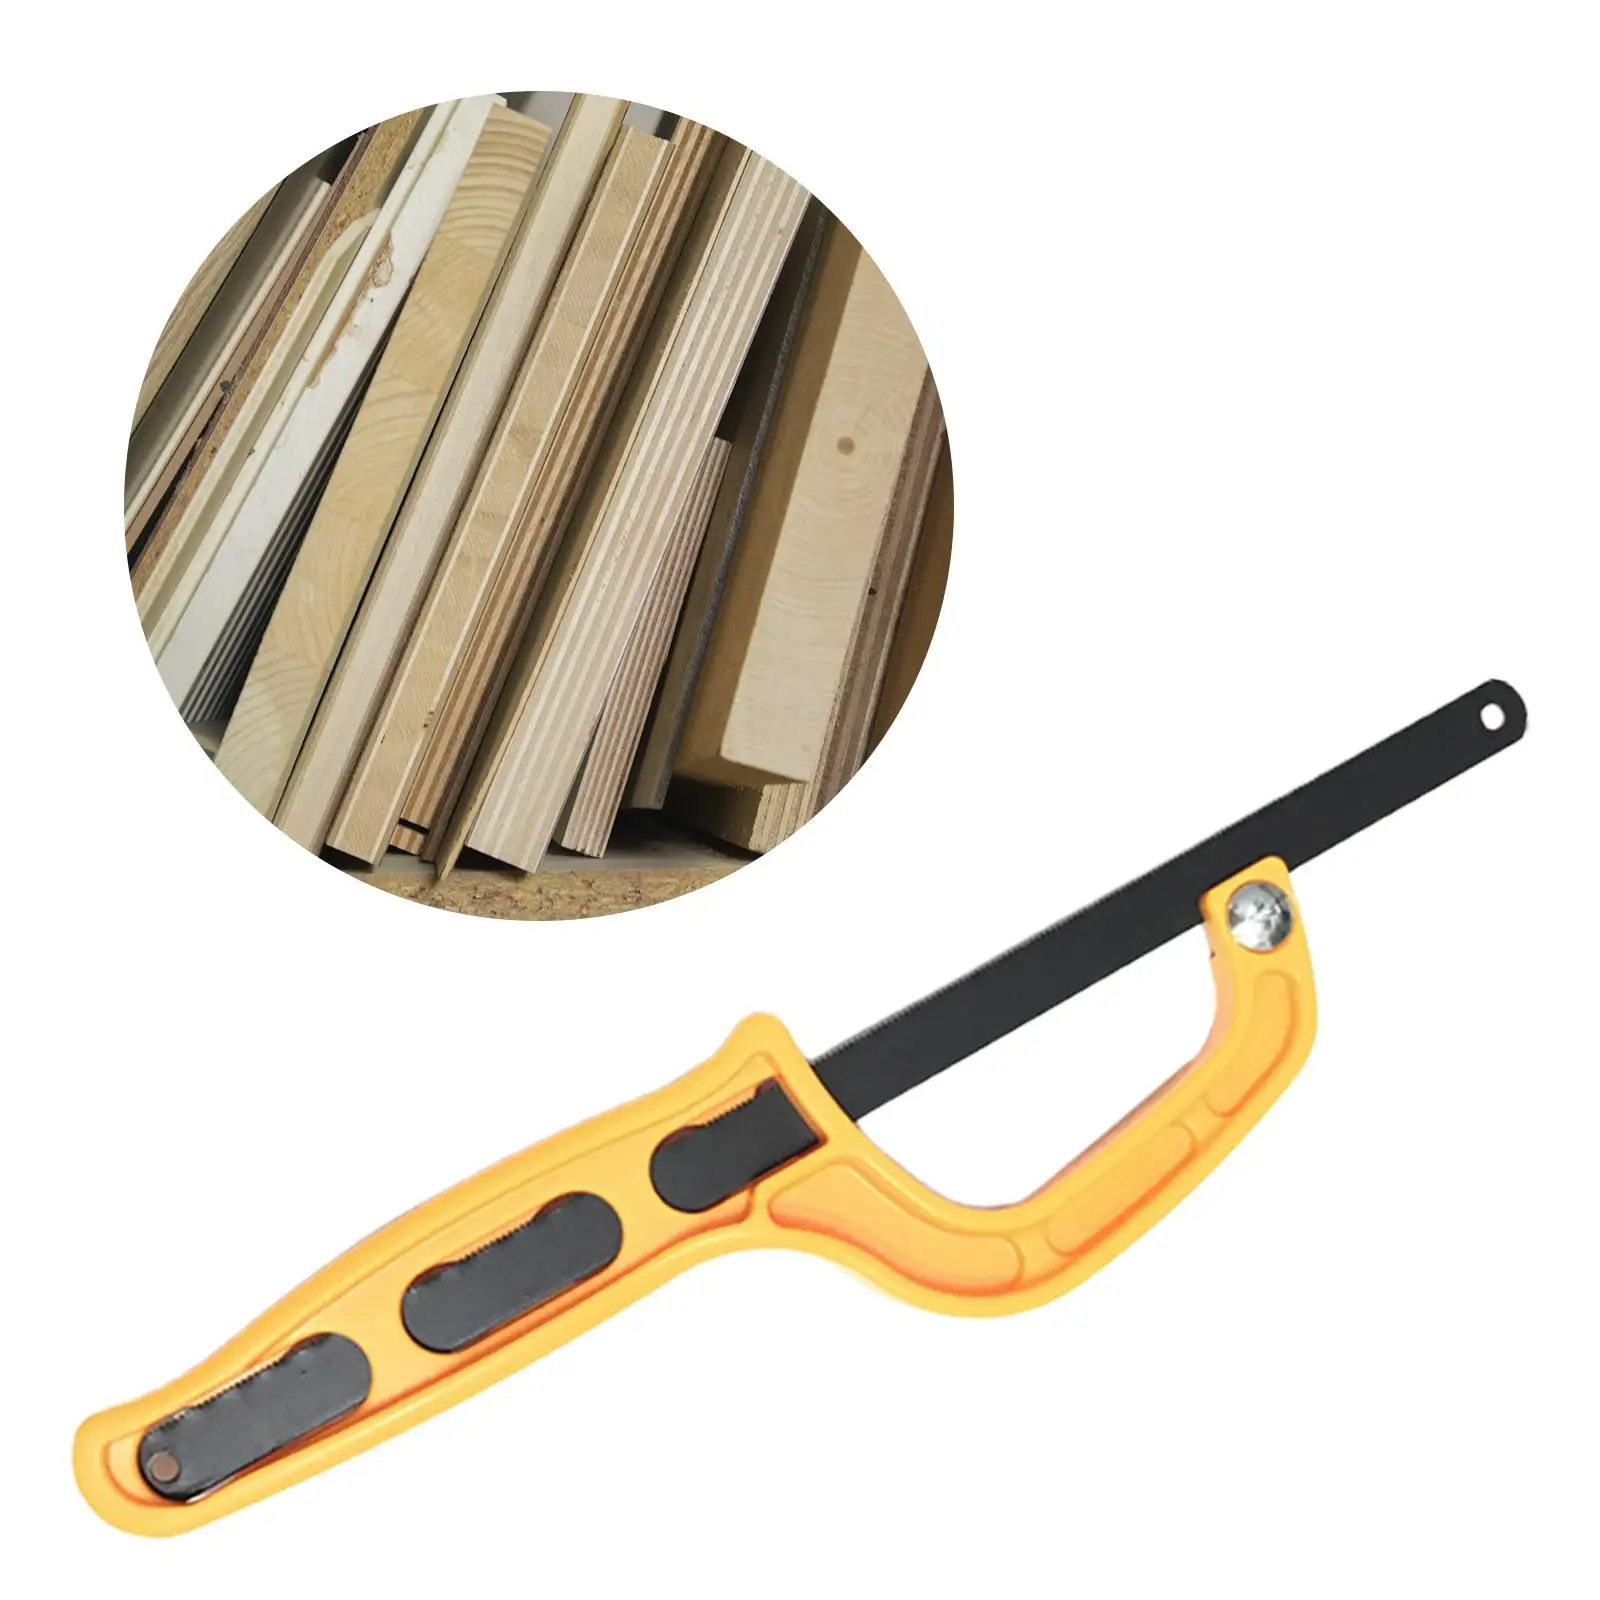 Portable Hacksaw Hand Saw Wood Metal Cutting Wood Trimmer Garden Household Carpentry Manual Outdoor Small Heavy Duty Pruning Saw